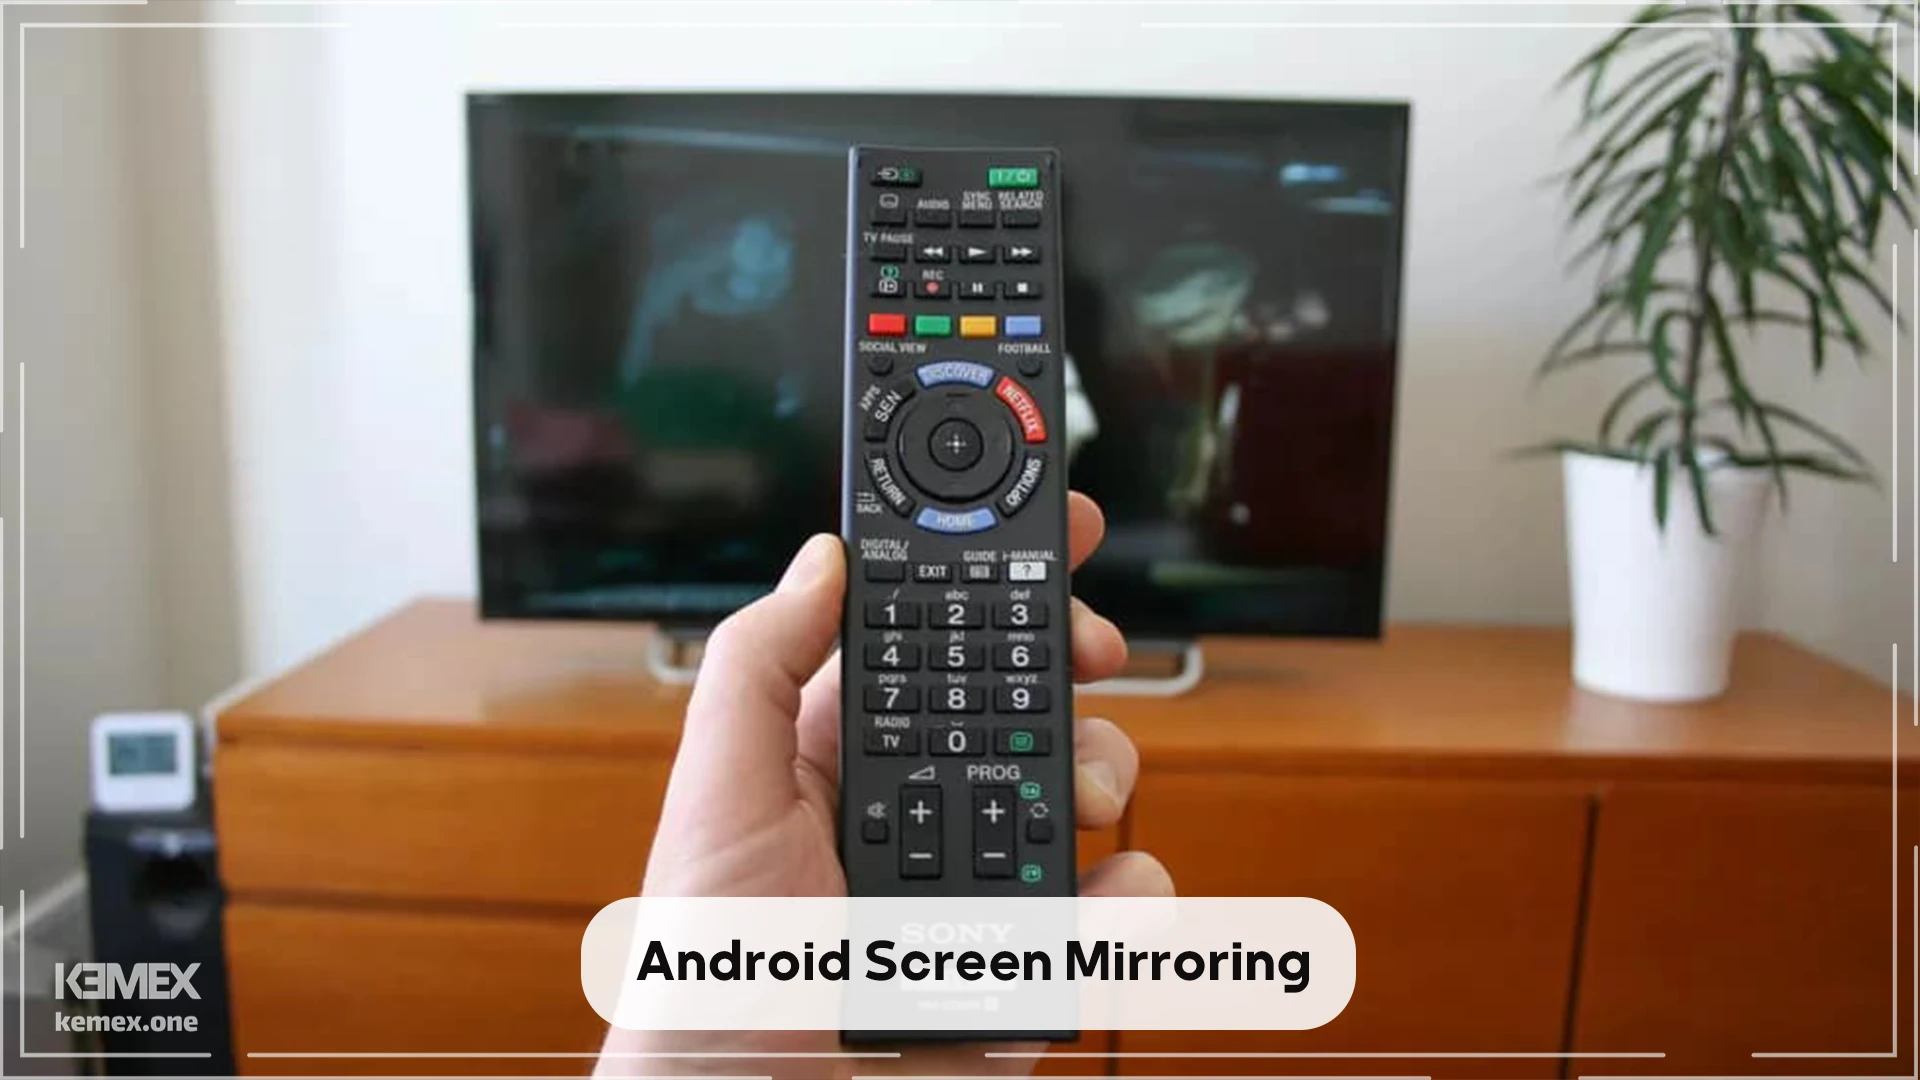 Android Screen Mirroring